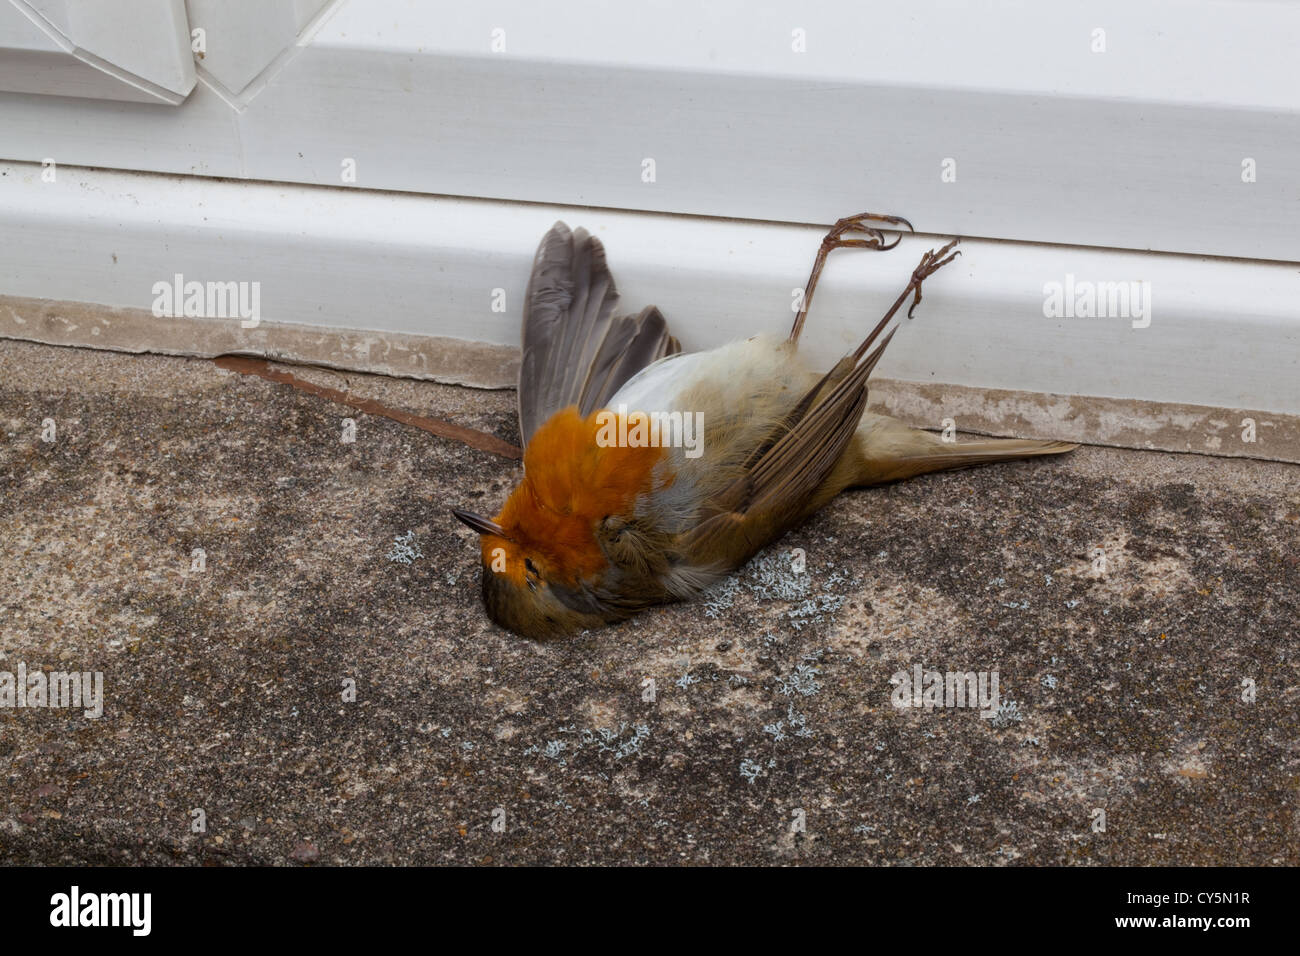 Robin (Erithacus rubecula). Glass window casualty. Bird flew into window thinking it could get through to the other side. Stock Photo